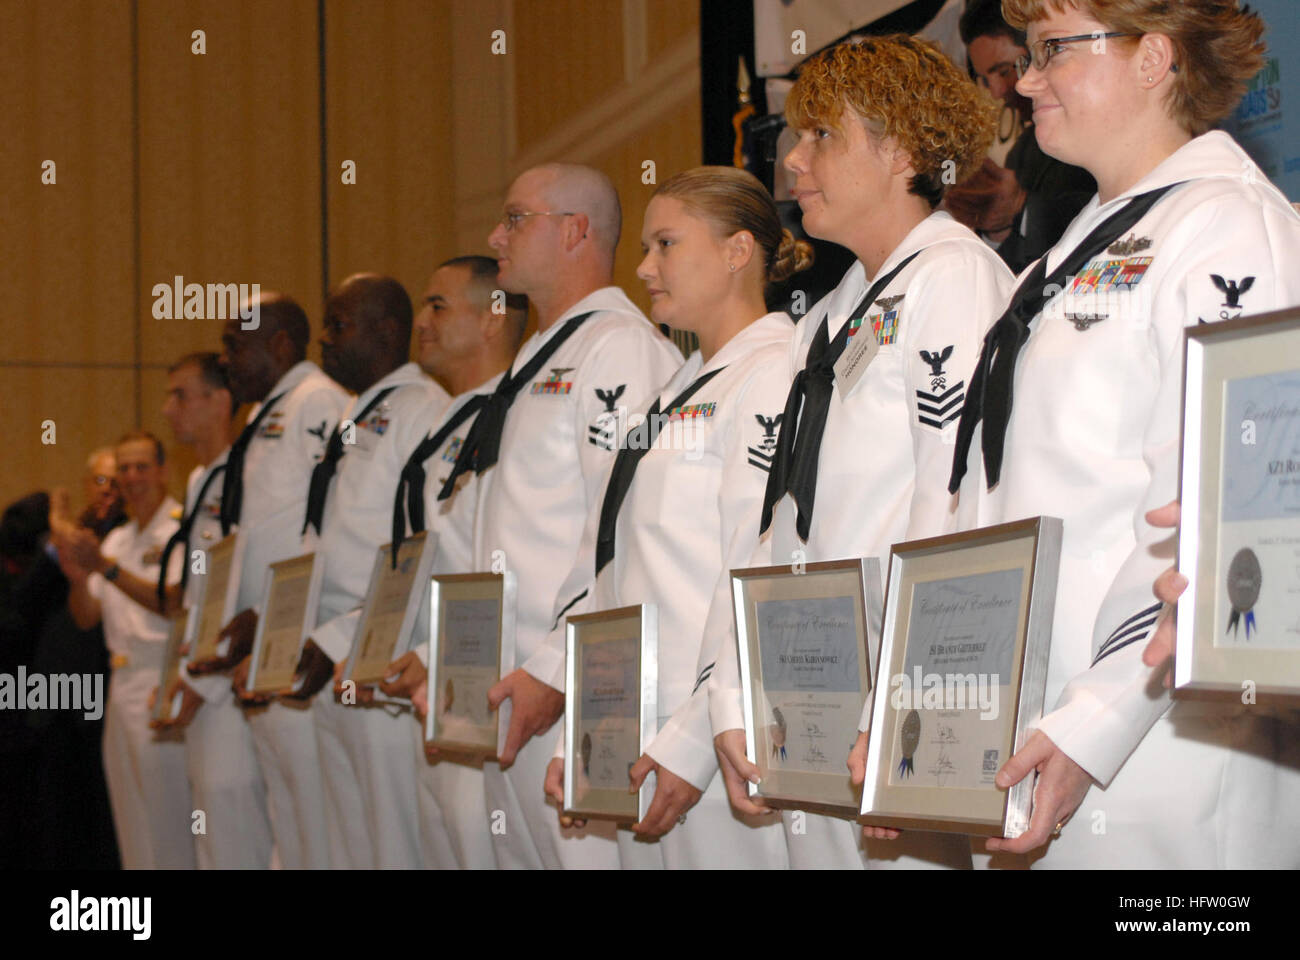 071011-N-8907D-037 NORFOLK, Va. (Oct. 11, 2007) - Nine finalists stand before the crowd at the Norfolk Waterside Marriot after being nominated for Military Citizen of the Year (MCOY). The MCOY award recognizes Sailors who have outstanding reputations for helping the community through volunteer work. U.S. Navy photo by Mass Communication Specialist 3rd Class David Danals (RELEASED) US Navy 071011-N-8907D-037 Nine finalists stand before the crowd at the Norfolk Waterside Marriot after being nominated for Military Citizen of the Year (MCOY) Stock Photo